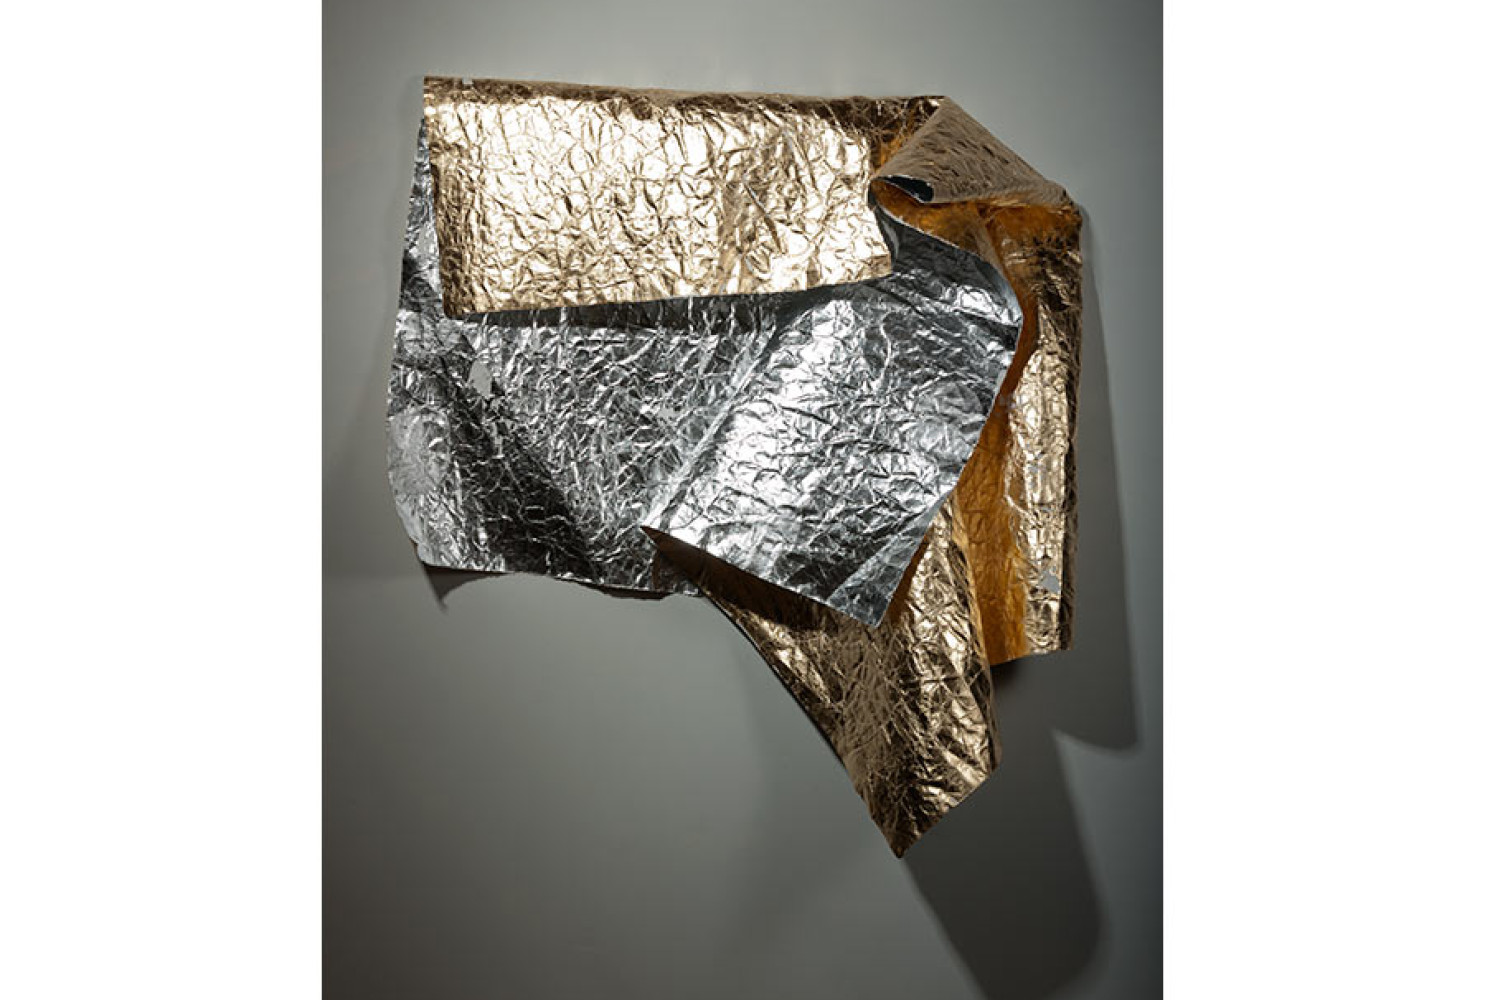 Damaged Emergency Blanked (for B. McQ.), 2015. Composition gold and aluminum leaf on distressed paper; 50 x 90 inches. Courtesy of the artist.